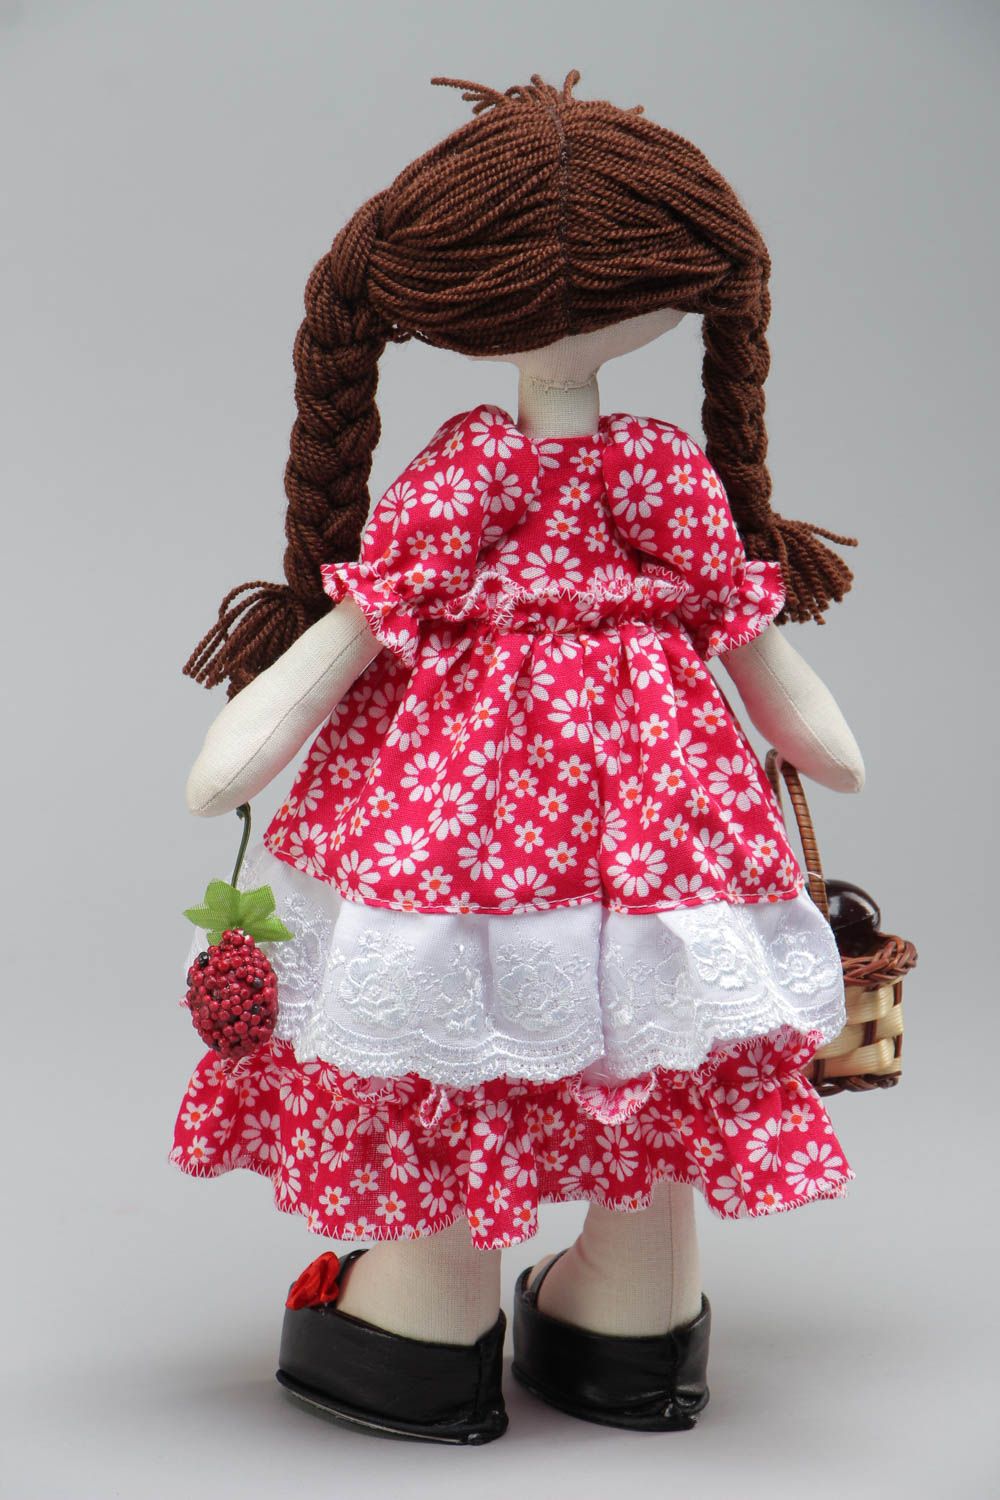 Handmade soft textile doll in red dress unusual home interior decor photo 4